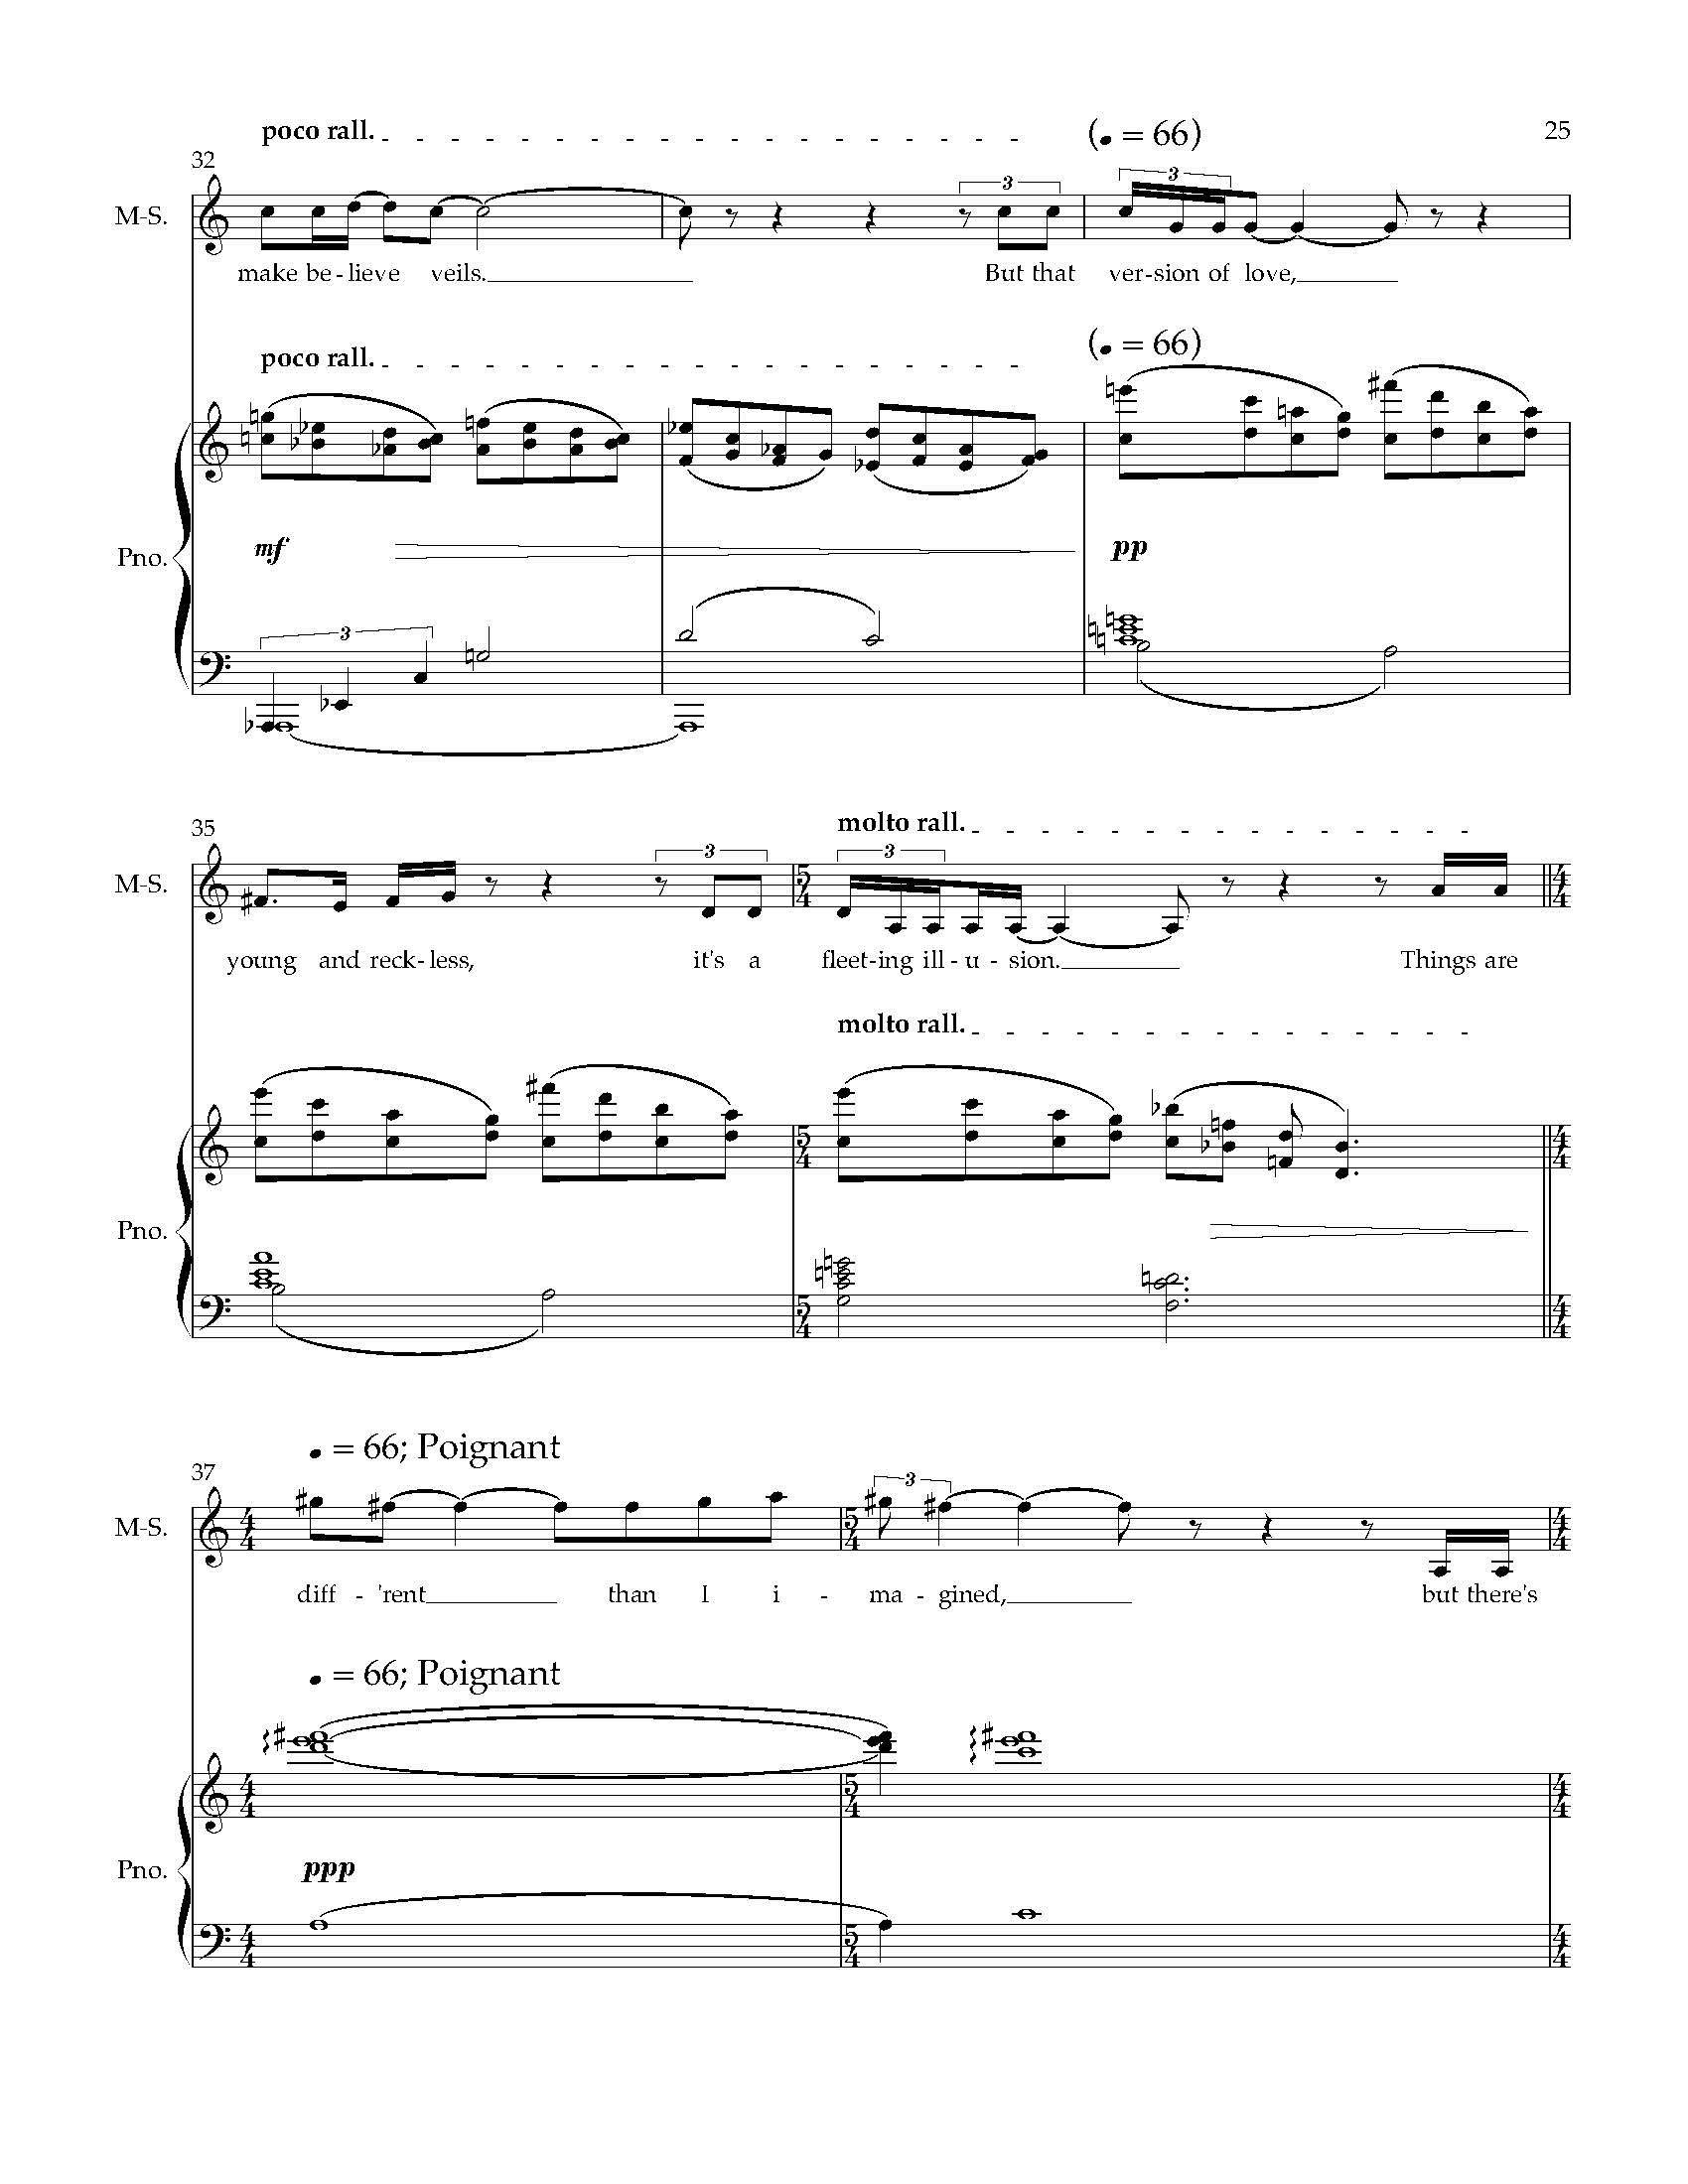 Five Arias from HWGS - Complete Score (1)_Page_29.jpg